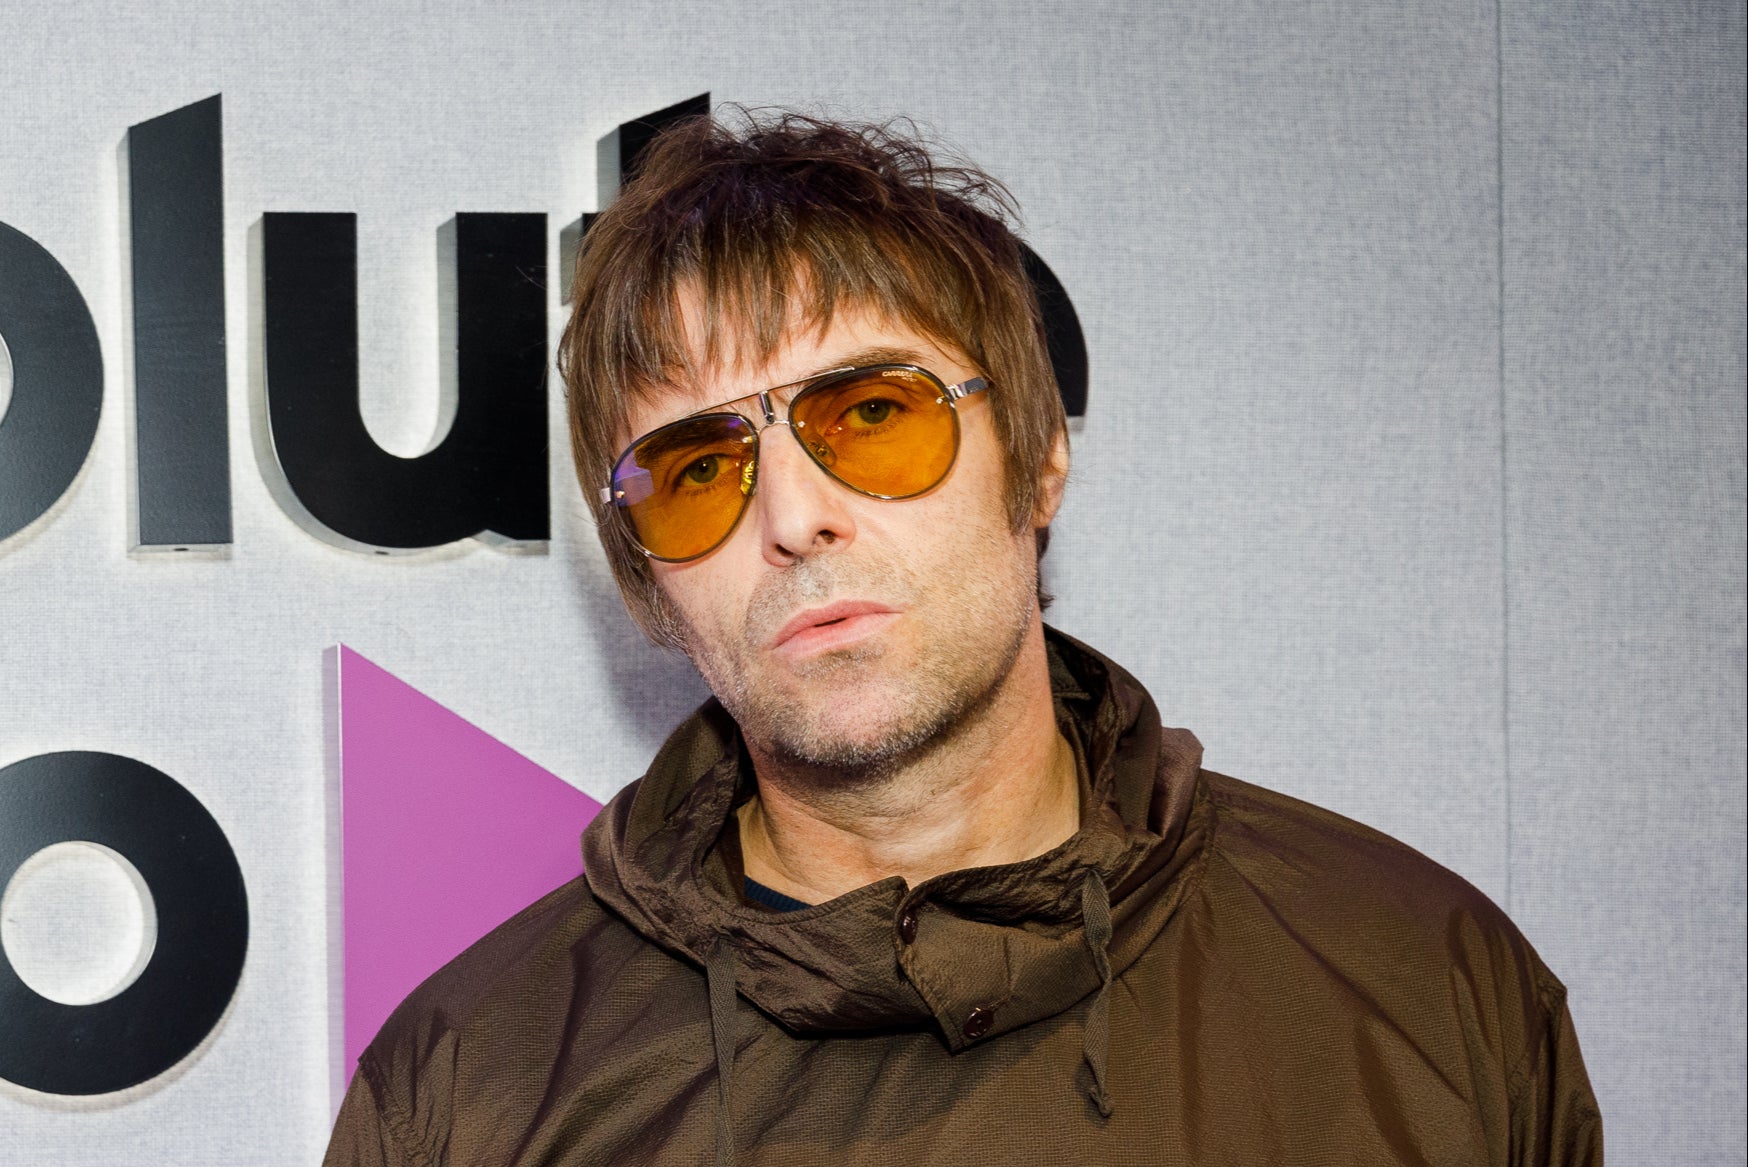 Liam Gallagher turned up his nose at Oasis’s Rock and Roll Hall of fame nomination